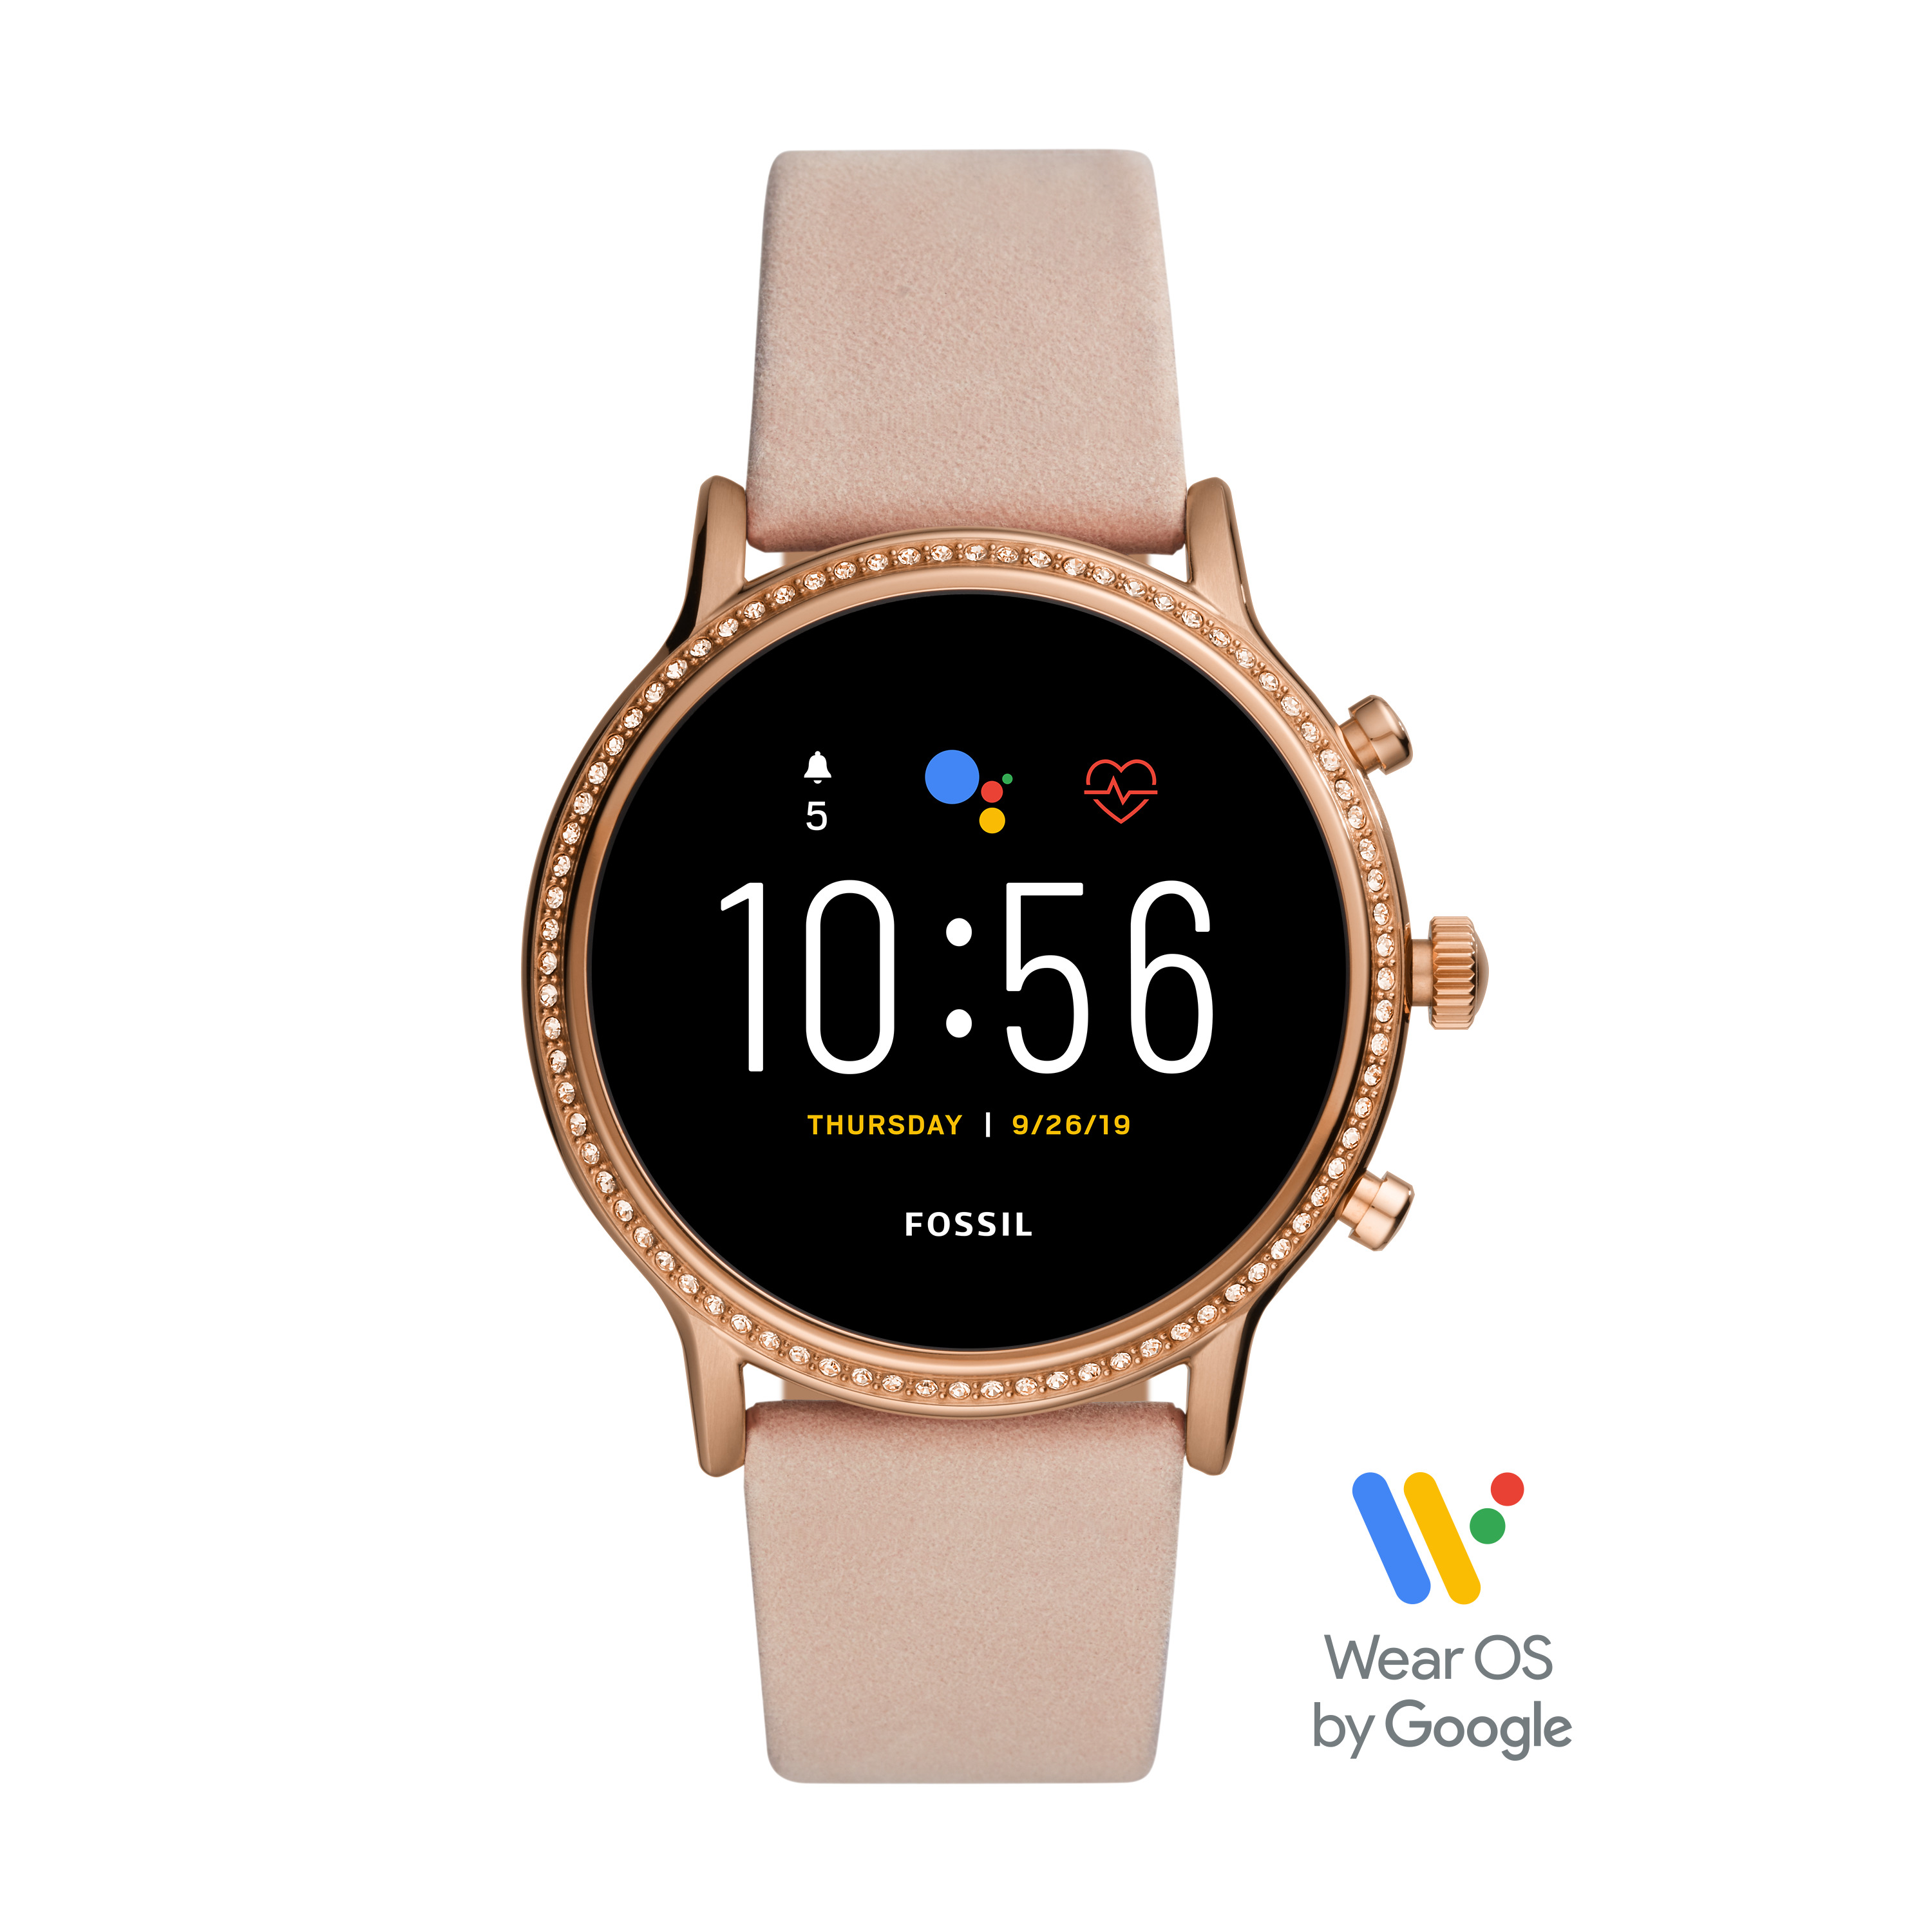 Gen 5 Fossil Touchscreen Smartwatch – now allows Android and iPhone users to answer tethered calls - Alvinology